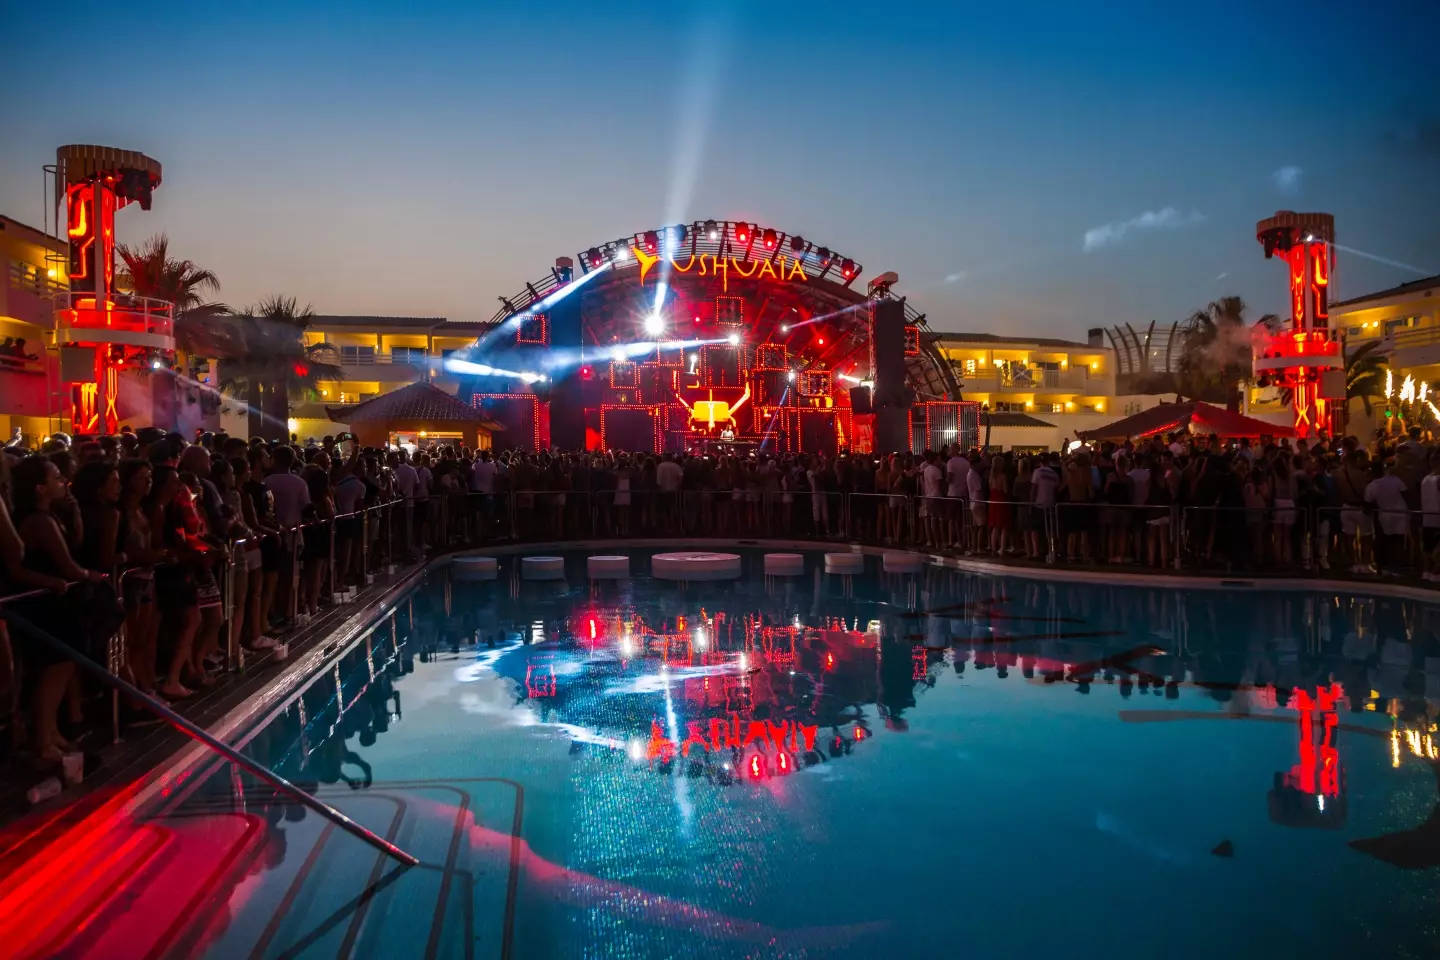 Ushuaïa in ibiza made it into the list, but wasn't the winner.